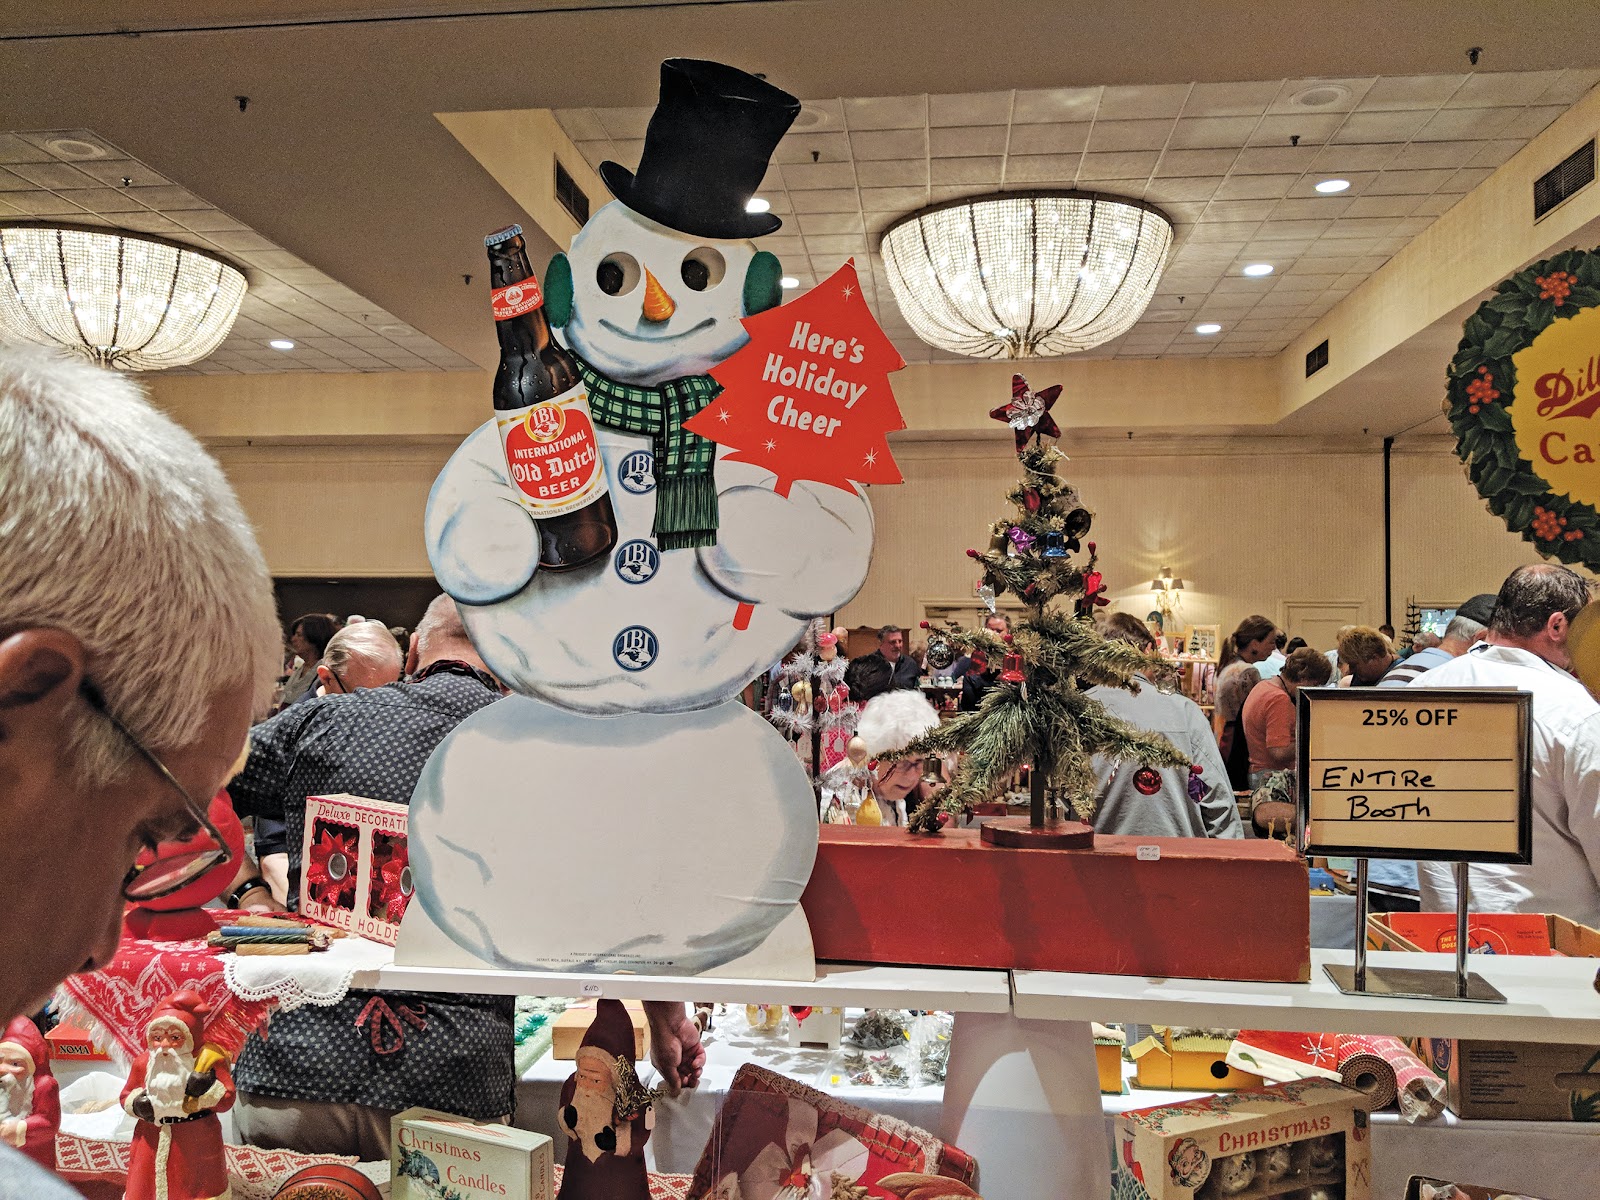 Salesroom of the 2018 Golden Glow Convention in Cincinnati, Ohio. Photo courtesy of The Golden Glow of Christmas Past.